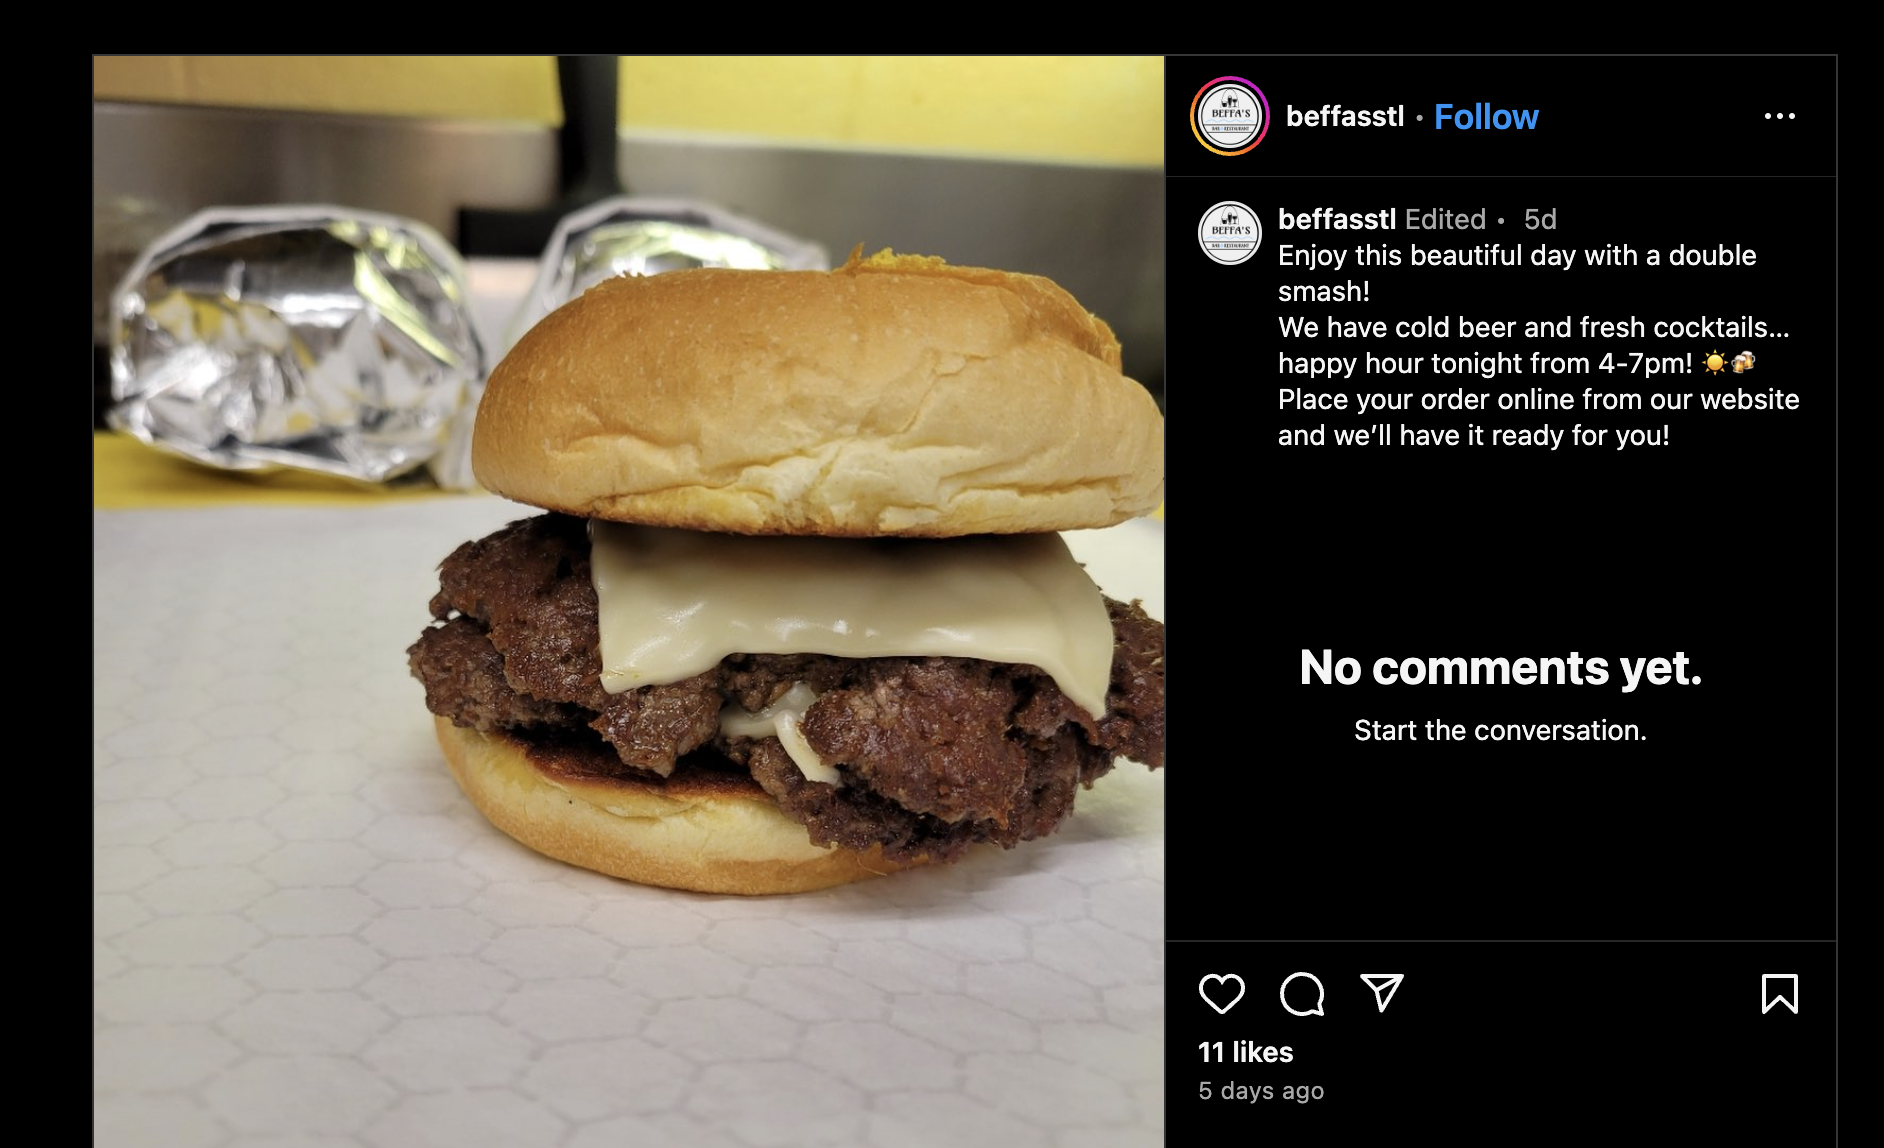 Instagram screenshot of double smash burger from Beffa's Bar and Restaurant page in Saint Louis Missouri